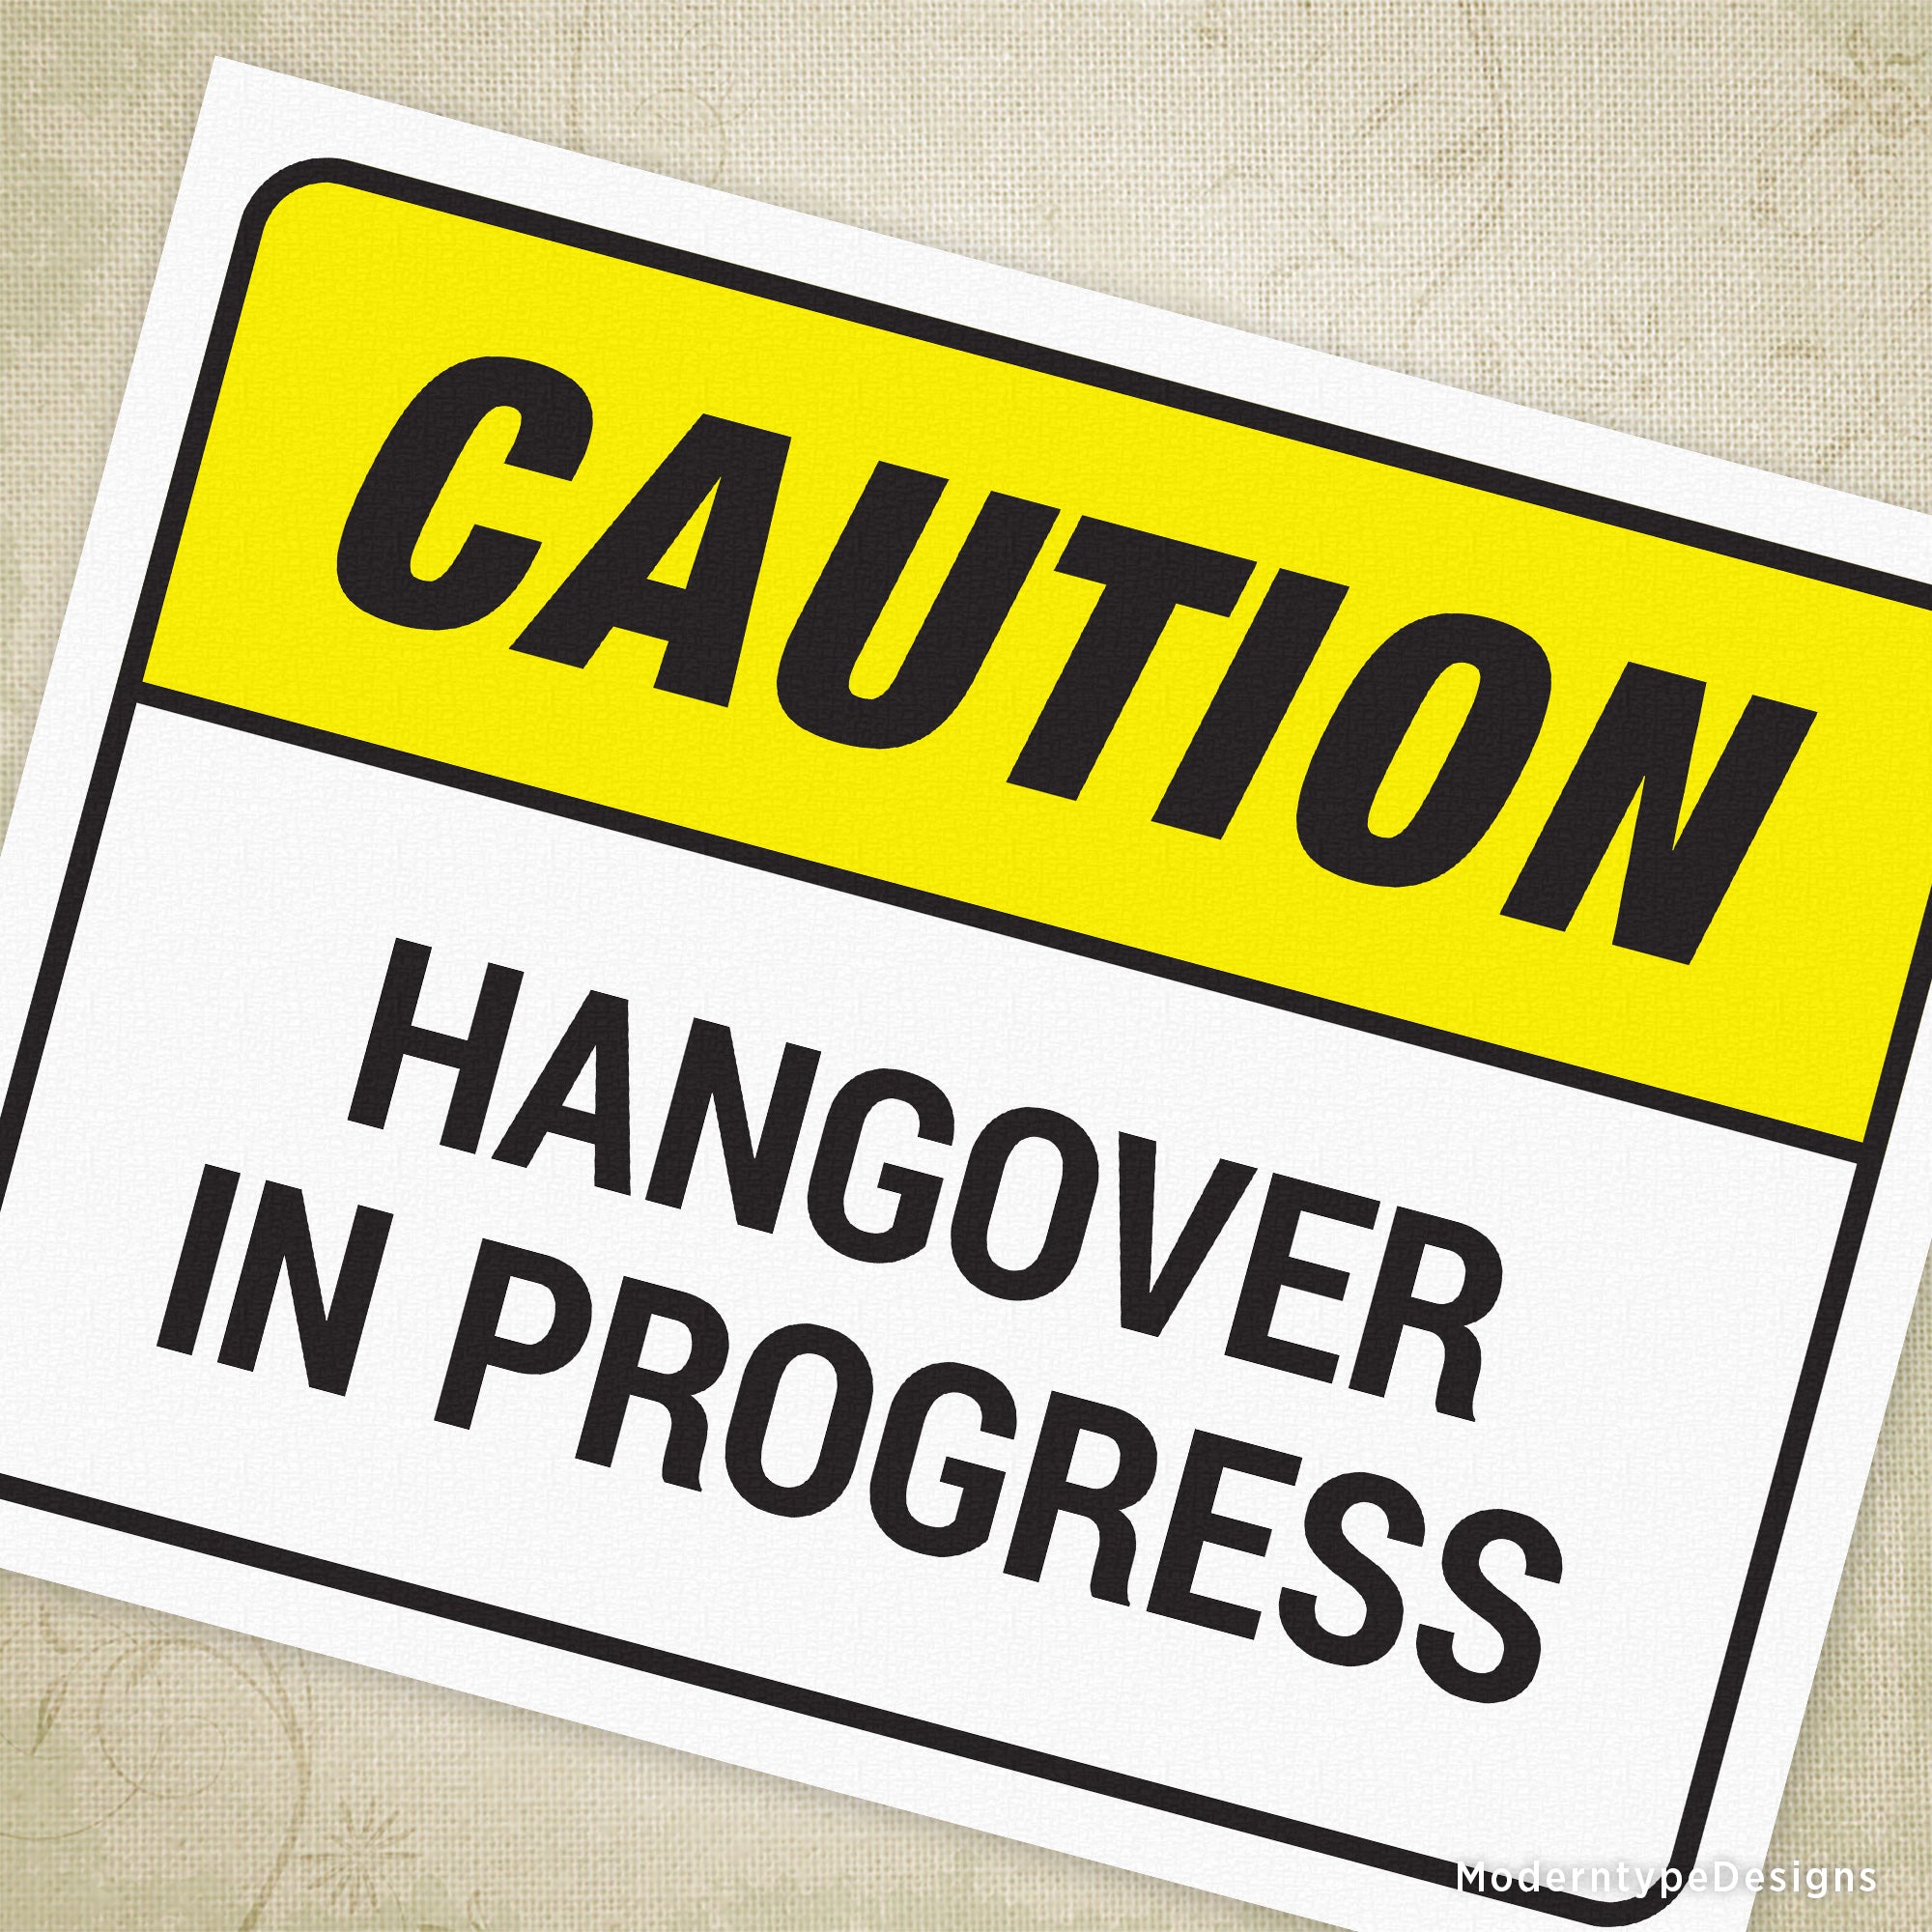 Caution Hangover in Progress Printable Sign